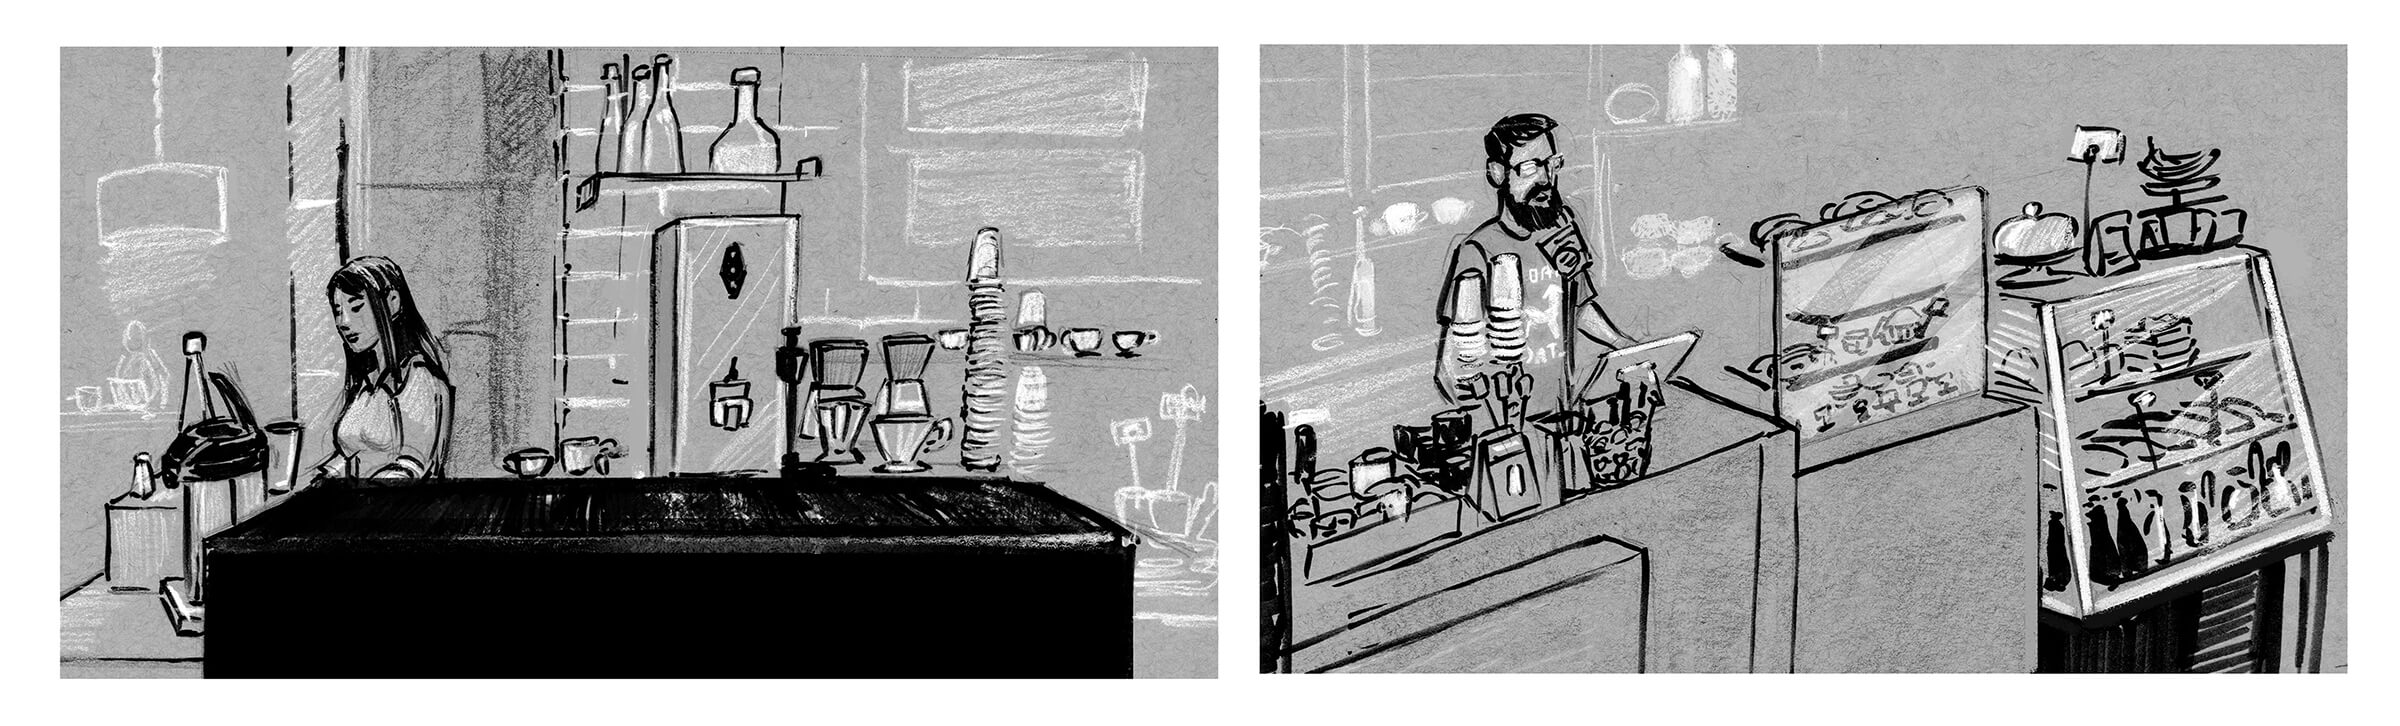 black and white drawings of a coffee shop, featuring baristas making coffee and operating the cash register